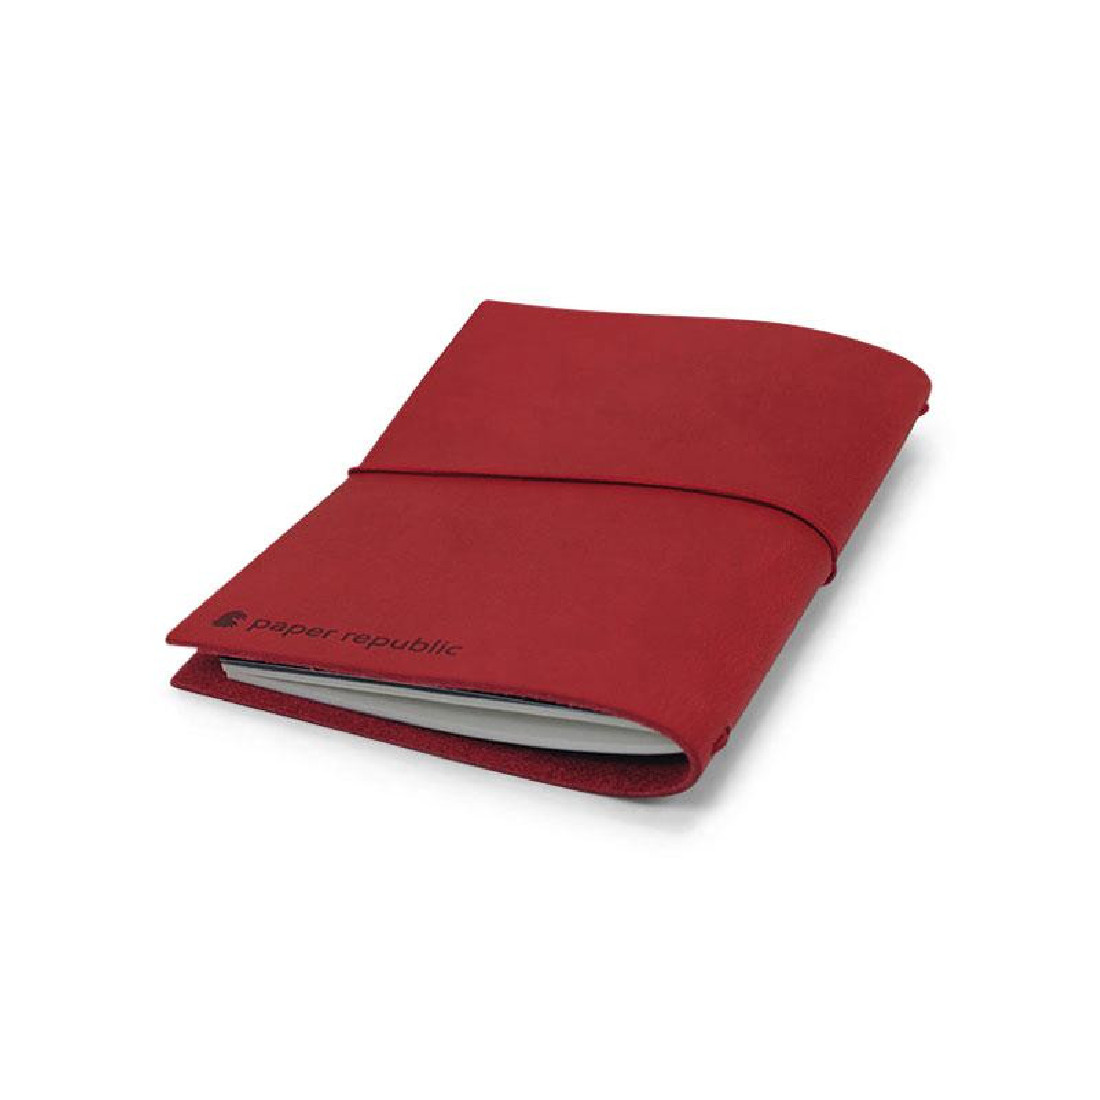 Paper Republic grand voyageur pocket red leather journal